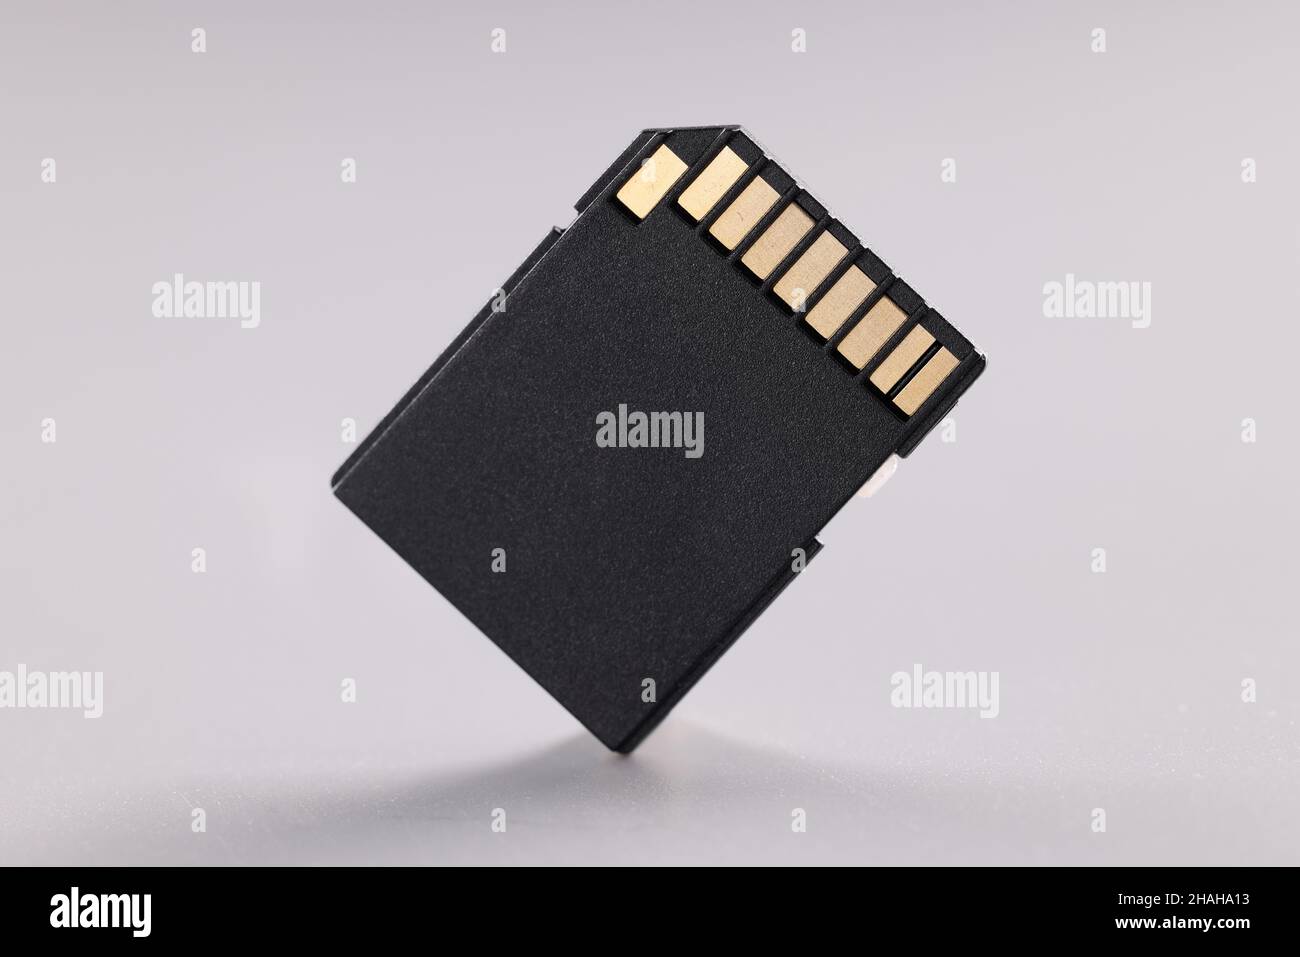 High quality black sd memory card with small gold disc on gray background Stock Photo